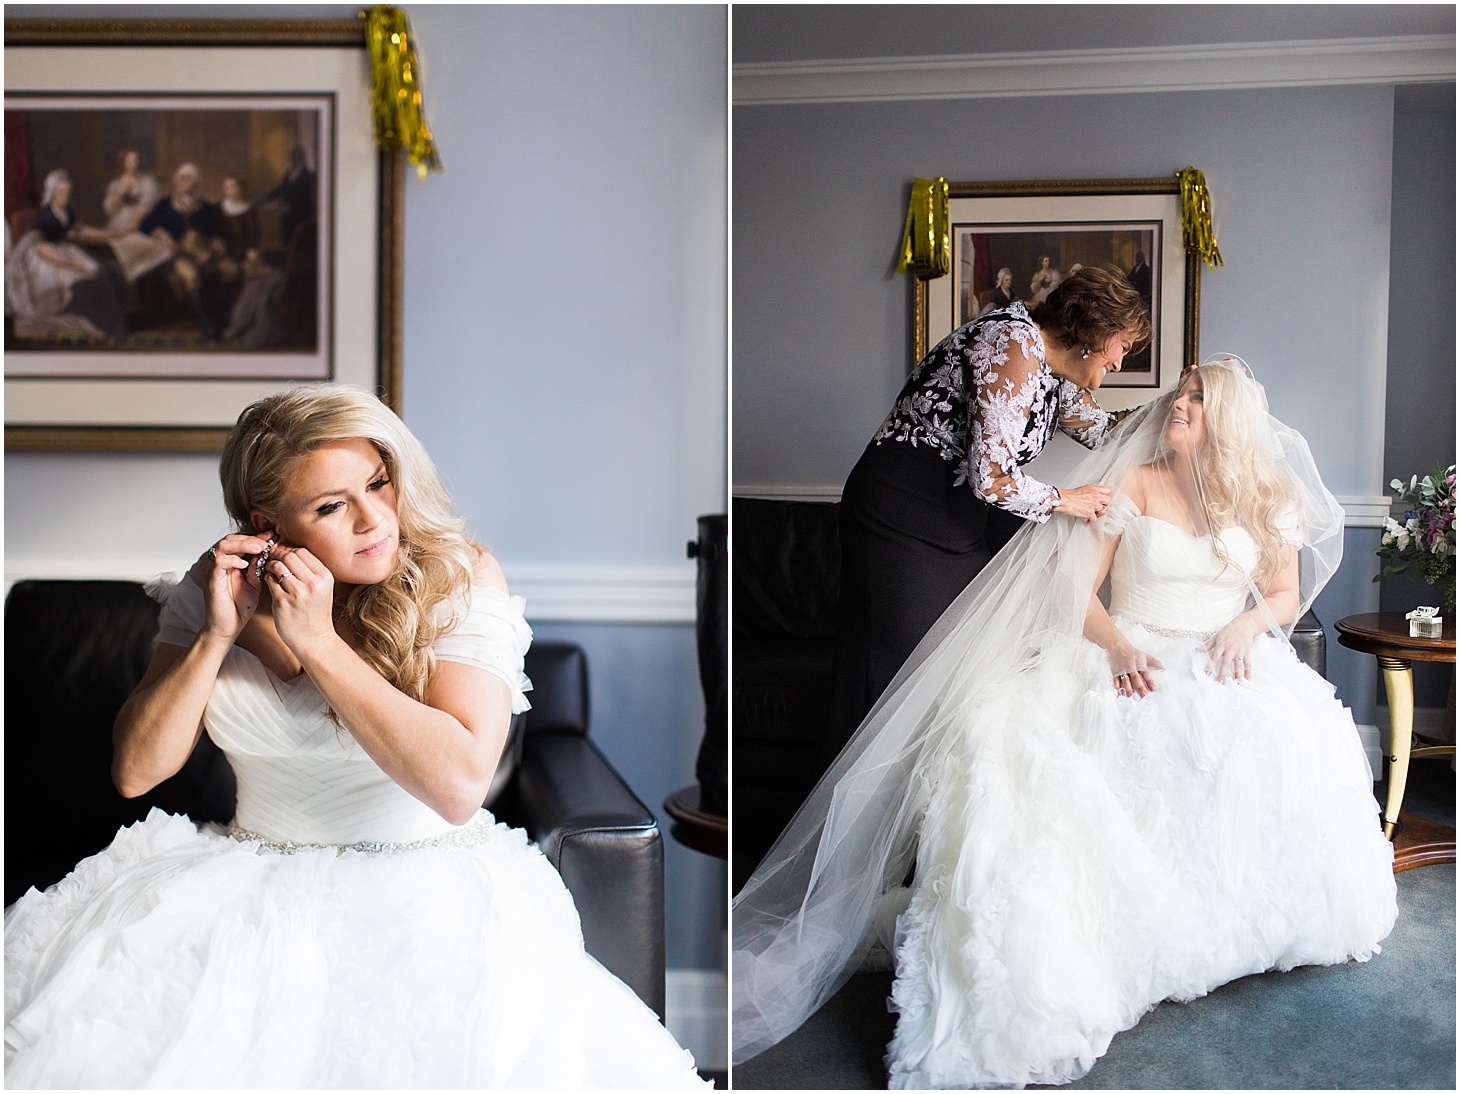 Bride Getting Ready in the Washington Suite at the Army and Navy Club | Luxe Winter Wedding in Washington, DC | Sarah Bradshaw Photography | Washington DC Wedding Photographer